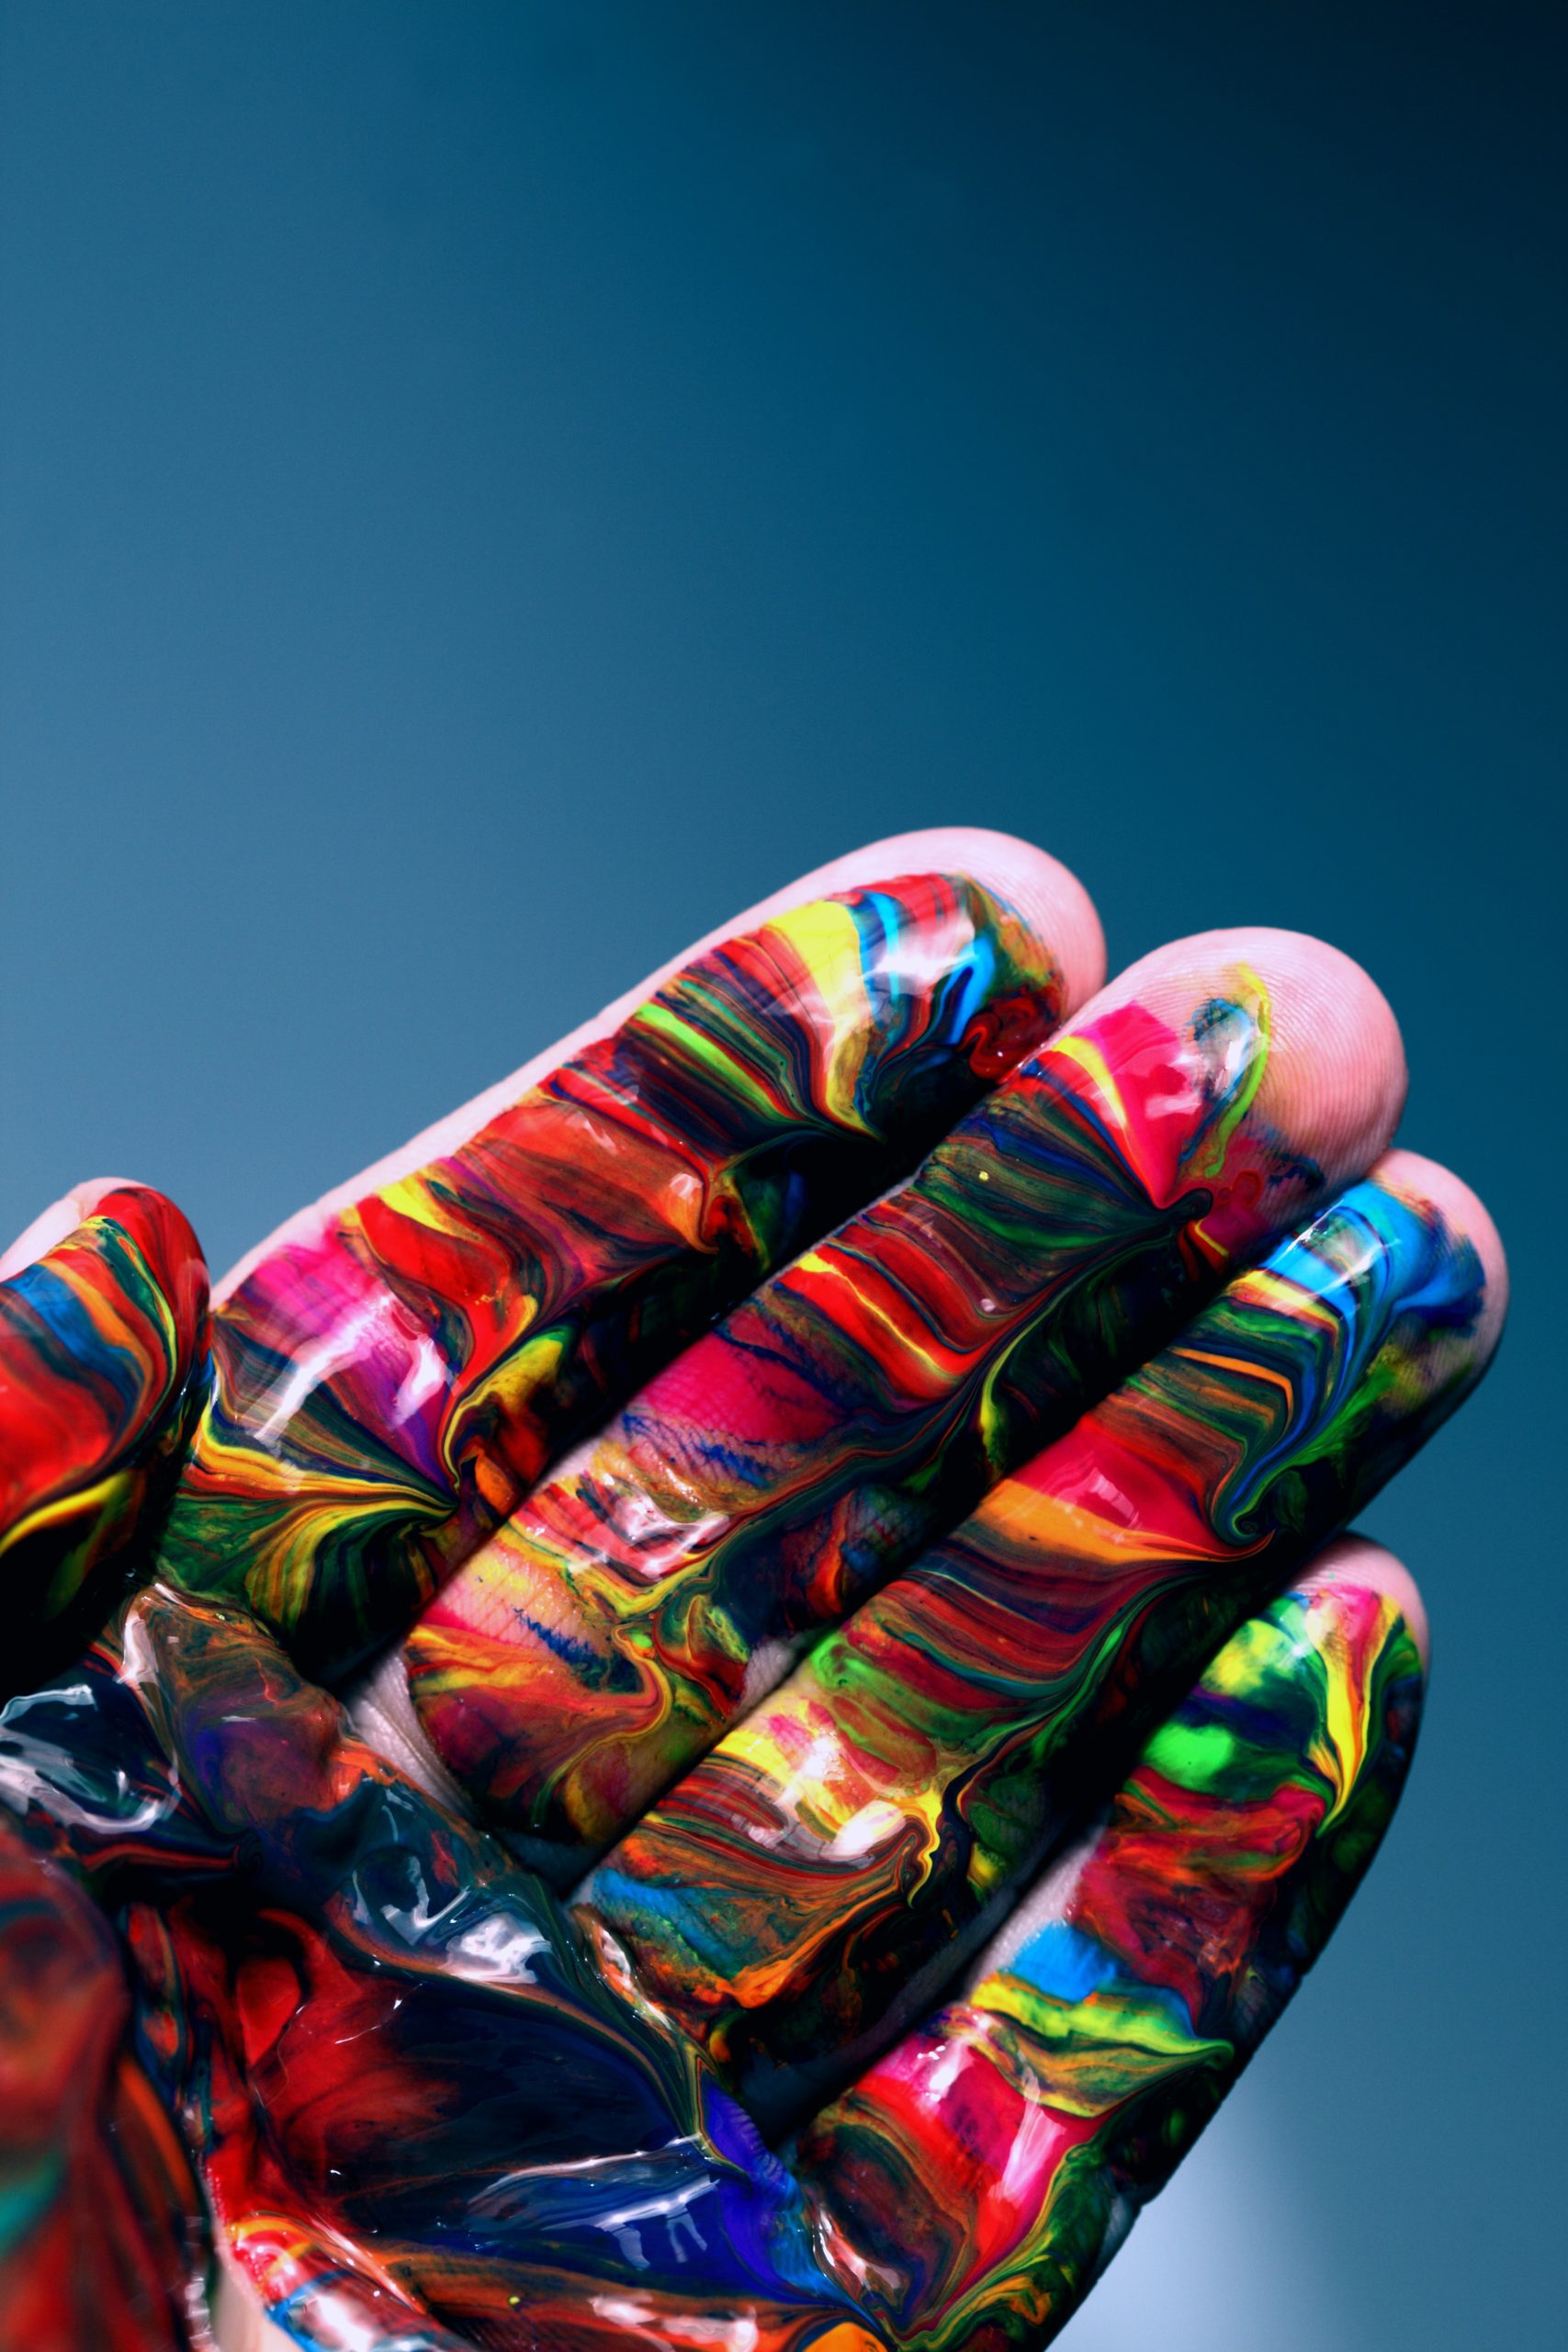 A hand with colorful paint on the fingers and palm